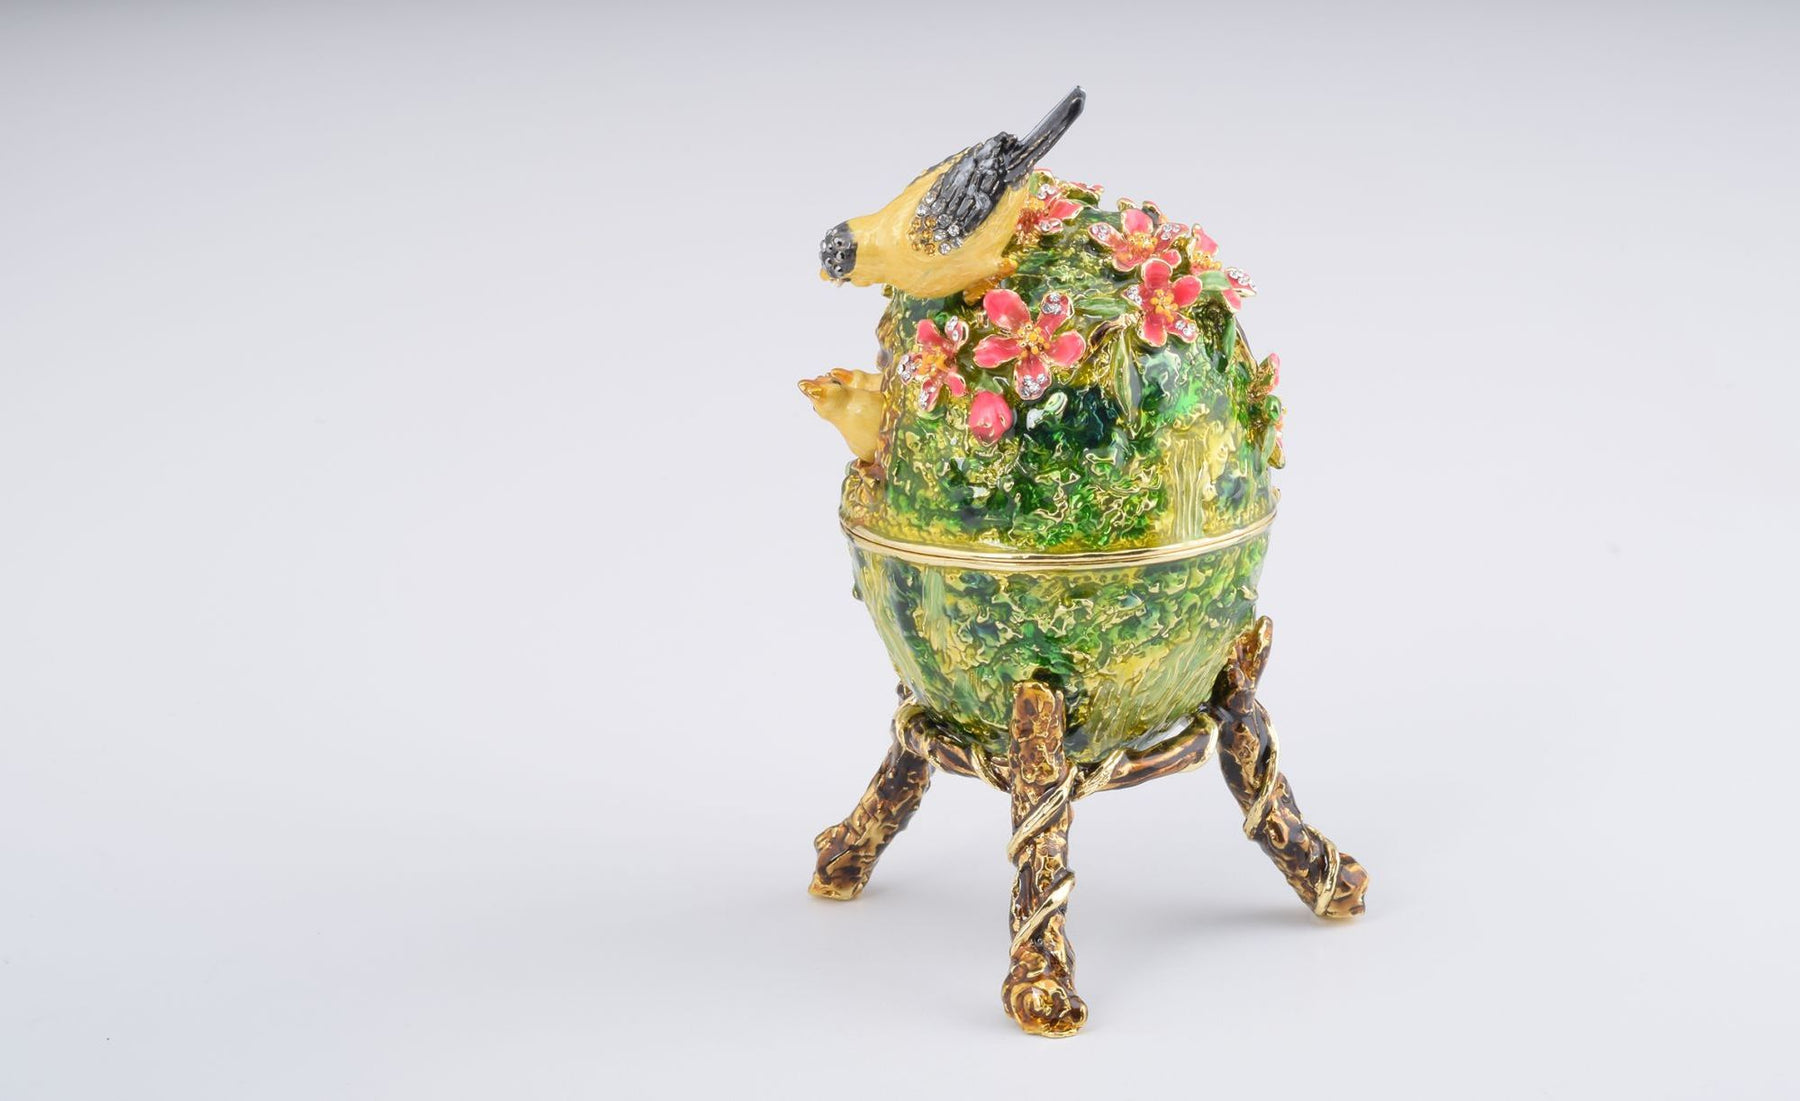 Bird Nest Faberge Style Egg with a Perl on Top